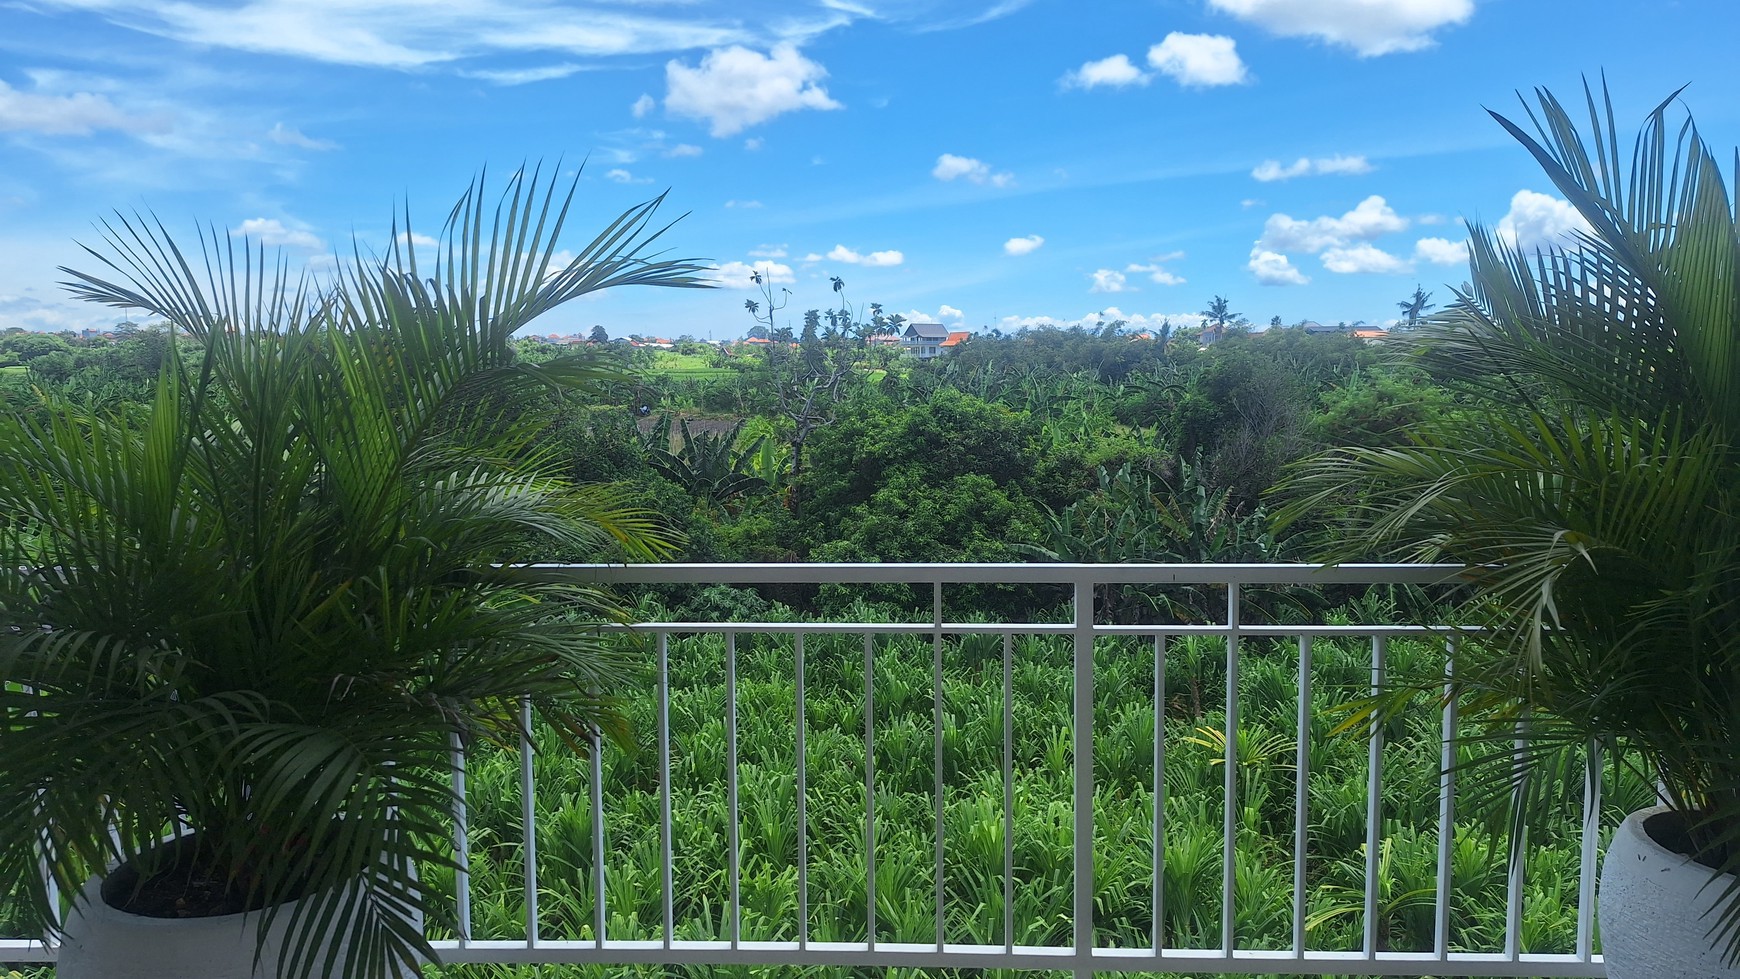 For Rent Yearly - Modern villa fully furnished area Canggu